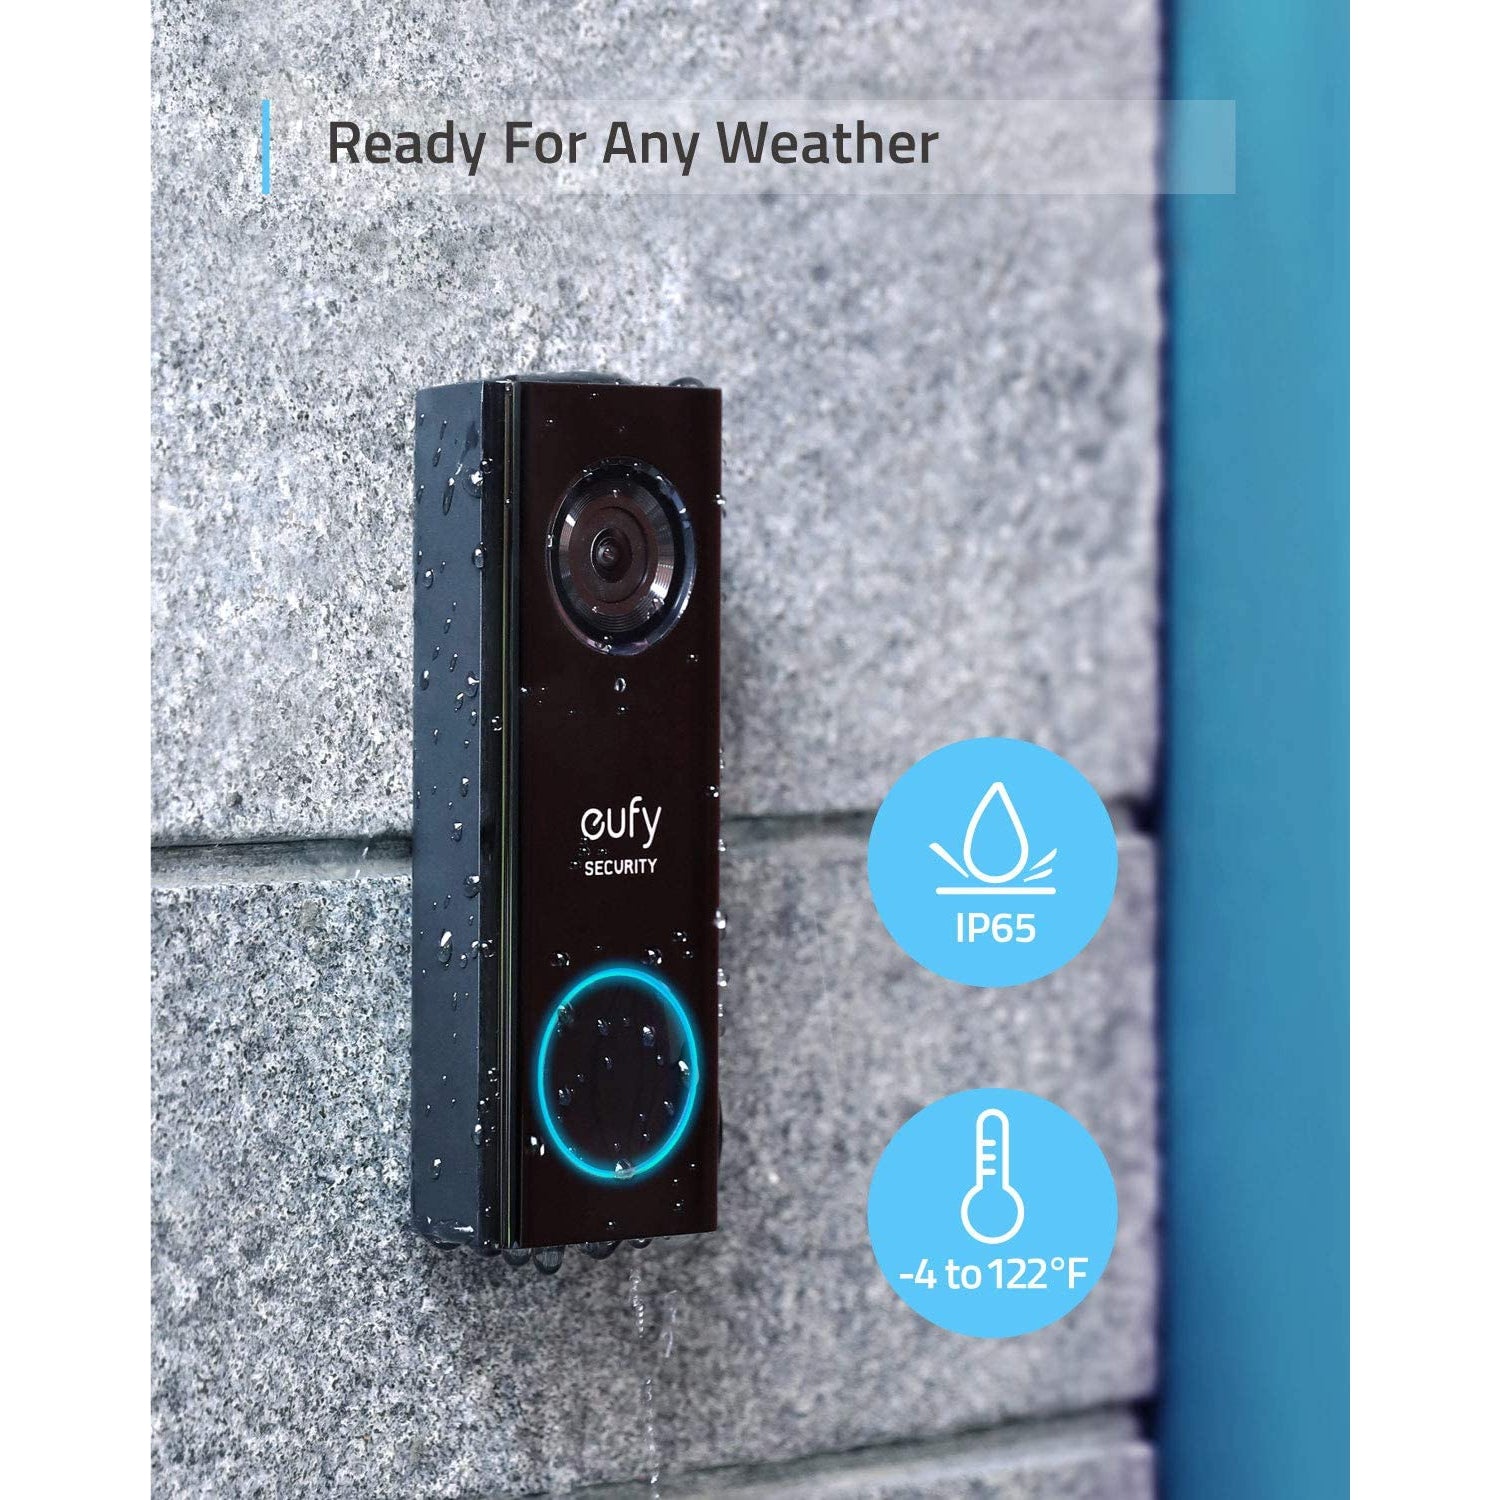 Eufy Security Wi-Fi Video Doorbell, 2K Resolution, Real-Time Response, Secure Local Storage, Free Wireless Chime, Wired